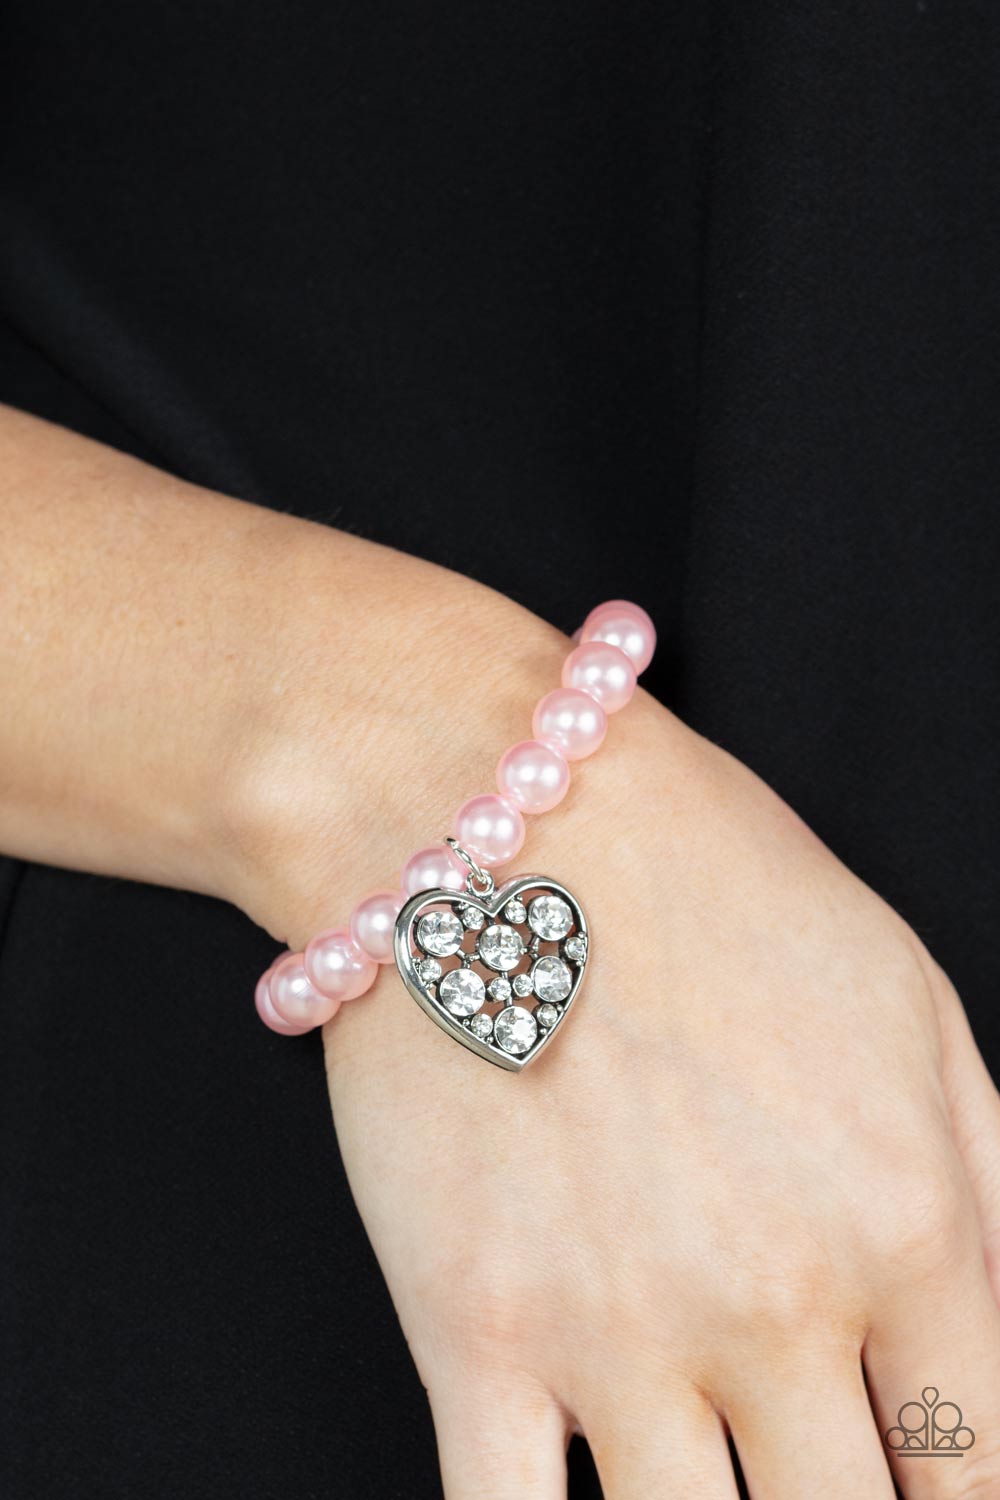 Cutely Crushing Pink Pearl - Heart Charm - Stretchy Bracelet - Paparazzi Accessories - A dramatically oversized white rhinestone encrusted silver heart charm dangles from a stretchy strand of bubbly pink pearls, creating a dazzle around your wrist.